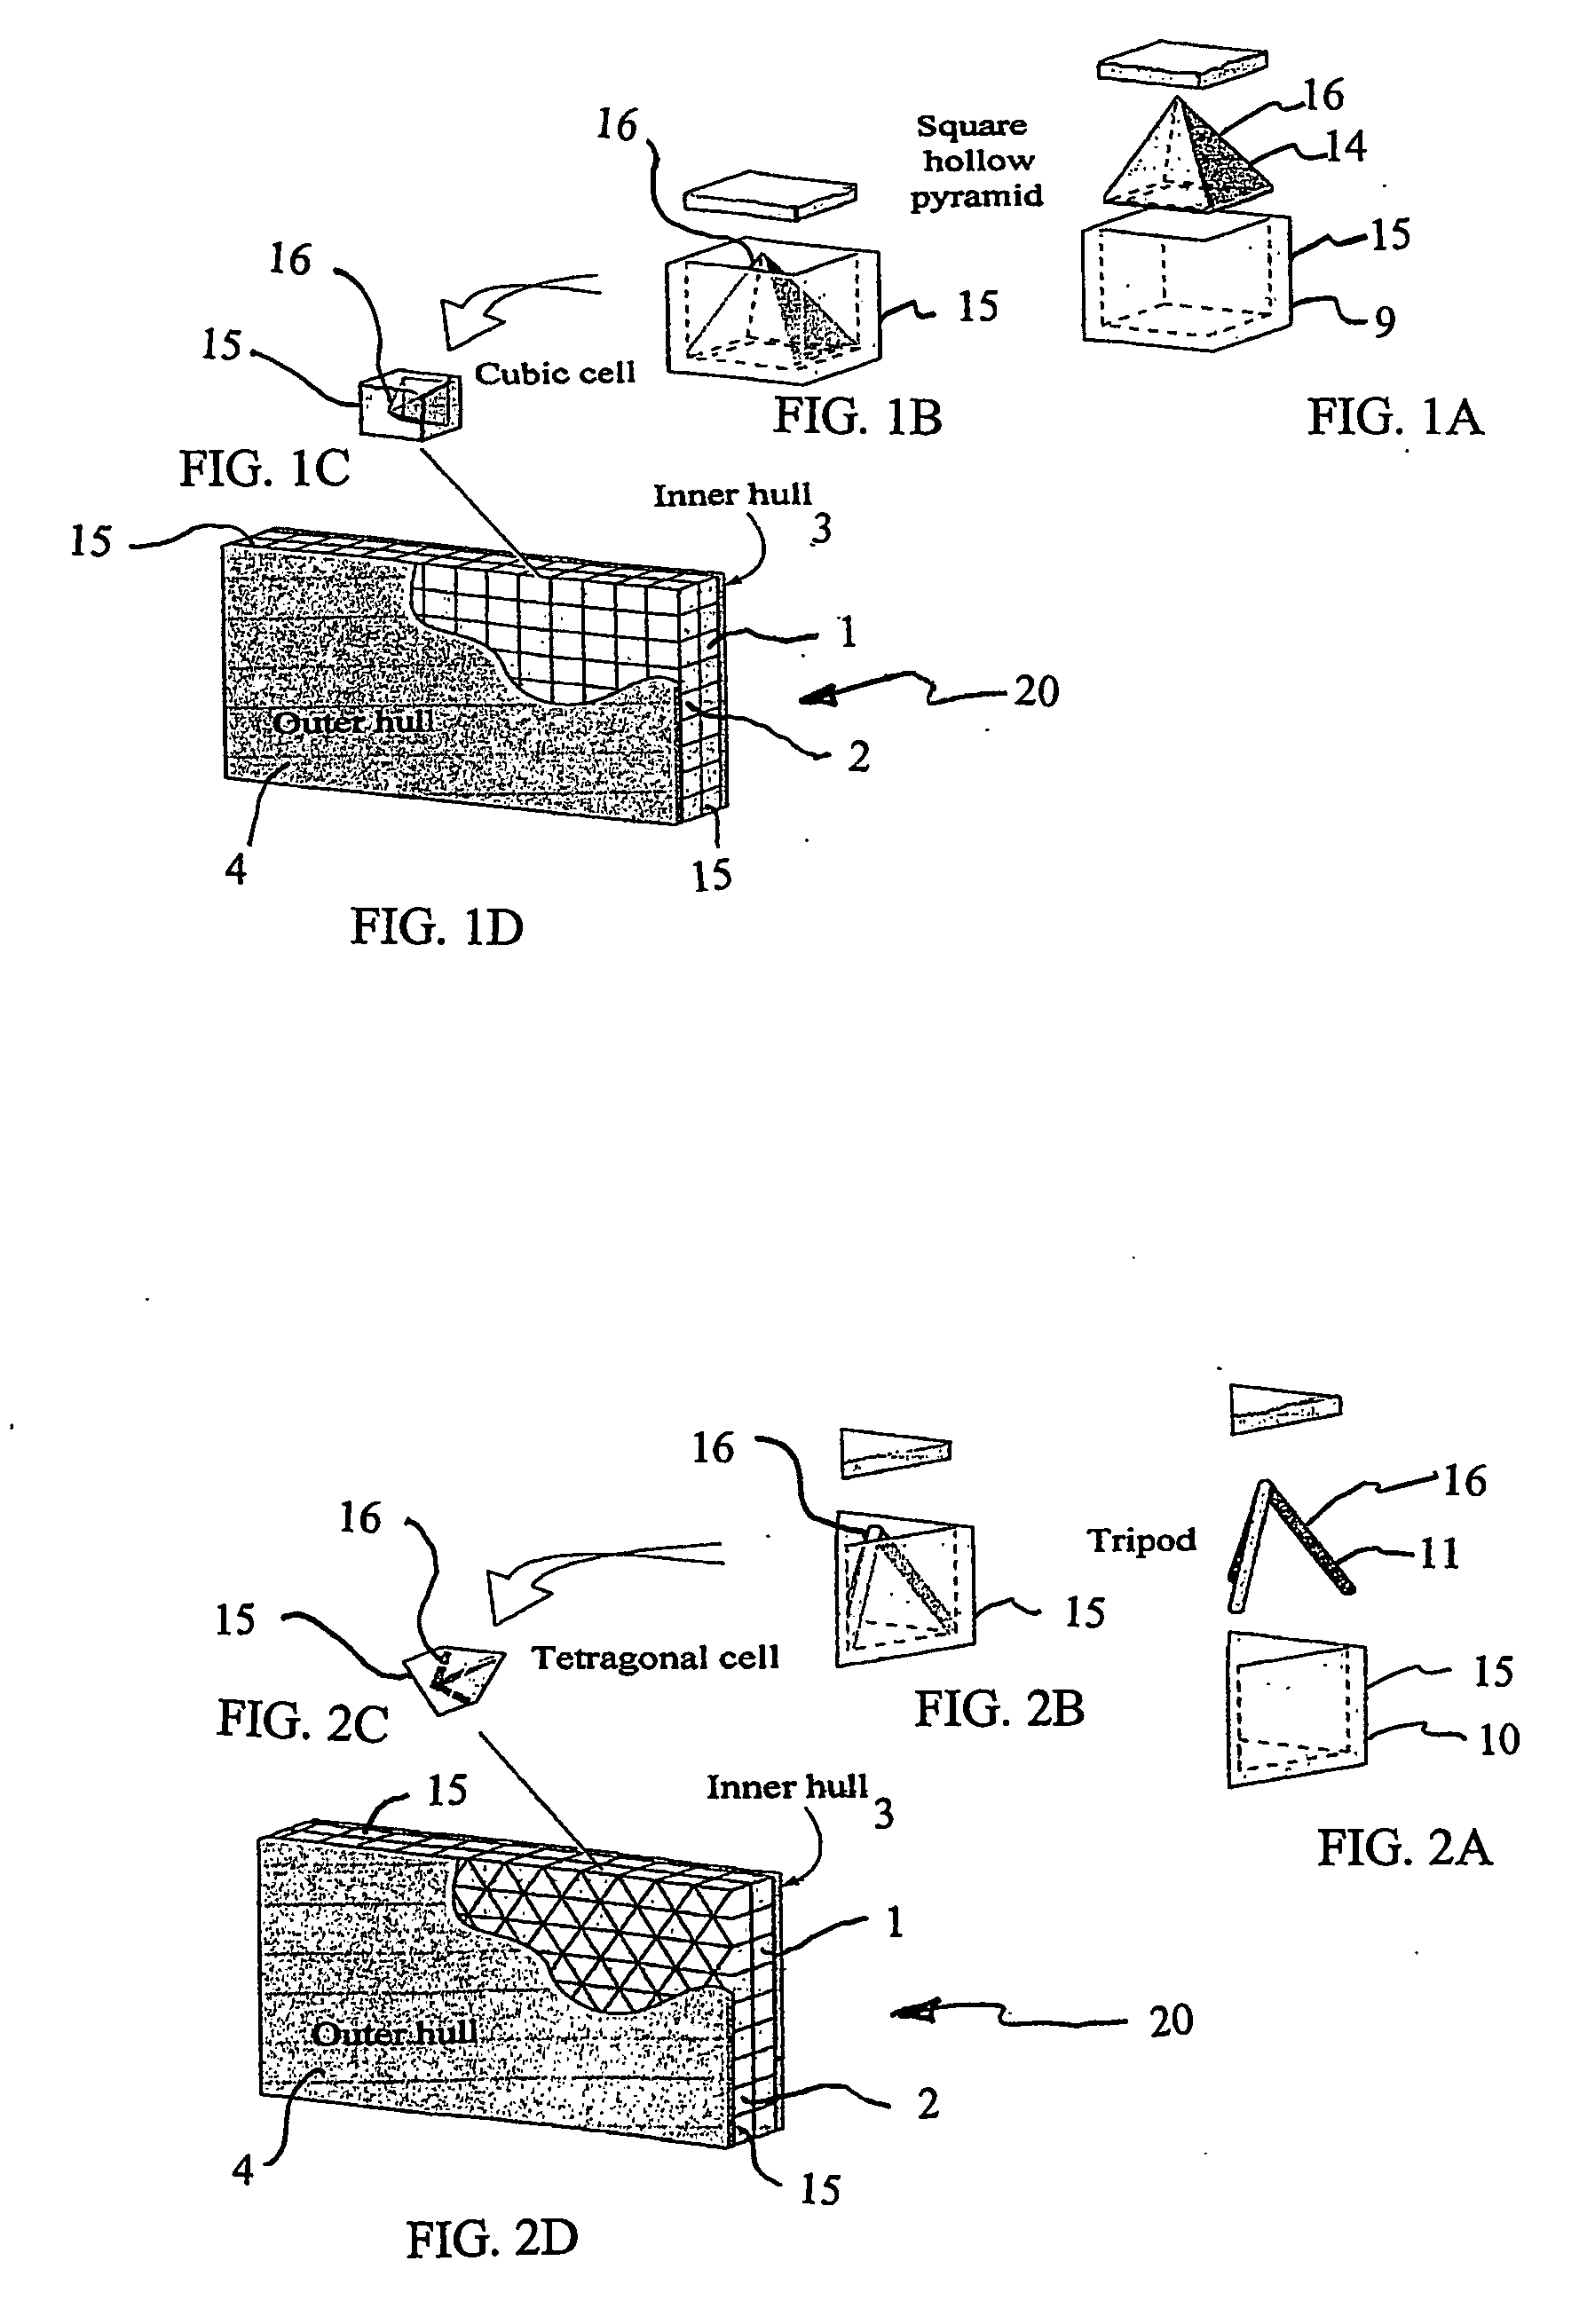 Method for manufacture of cellular materials and structures for blast and impact mitigation and resulting structure